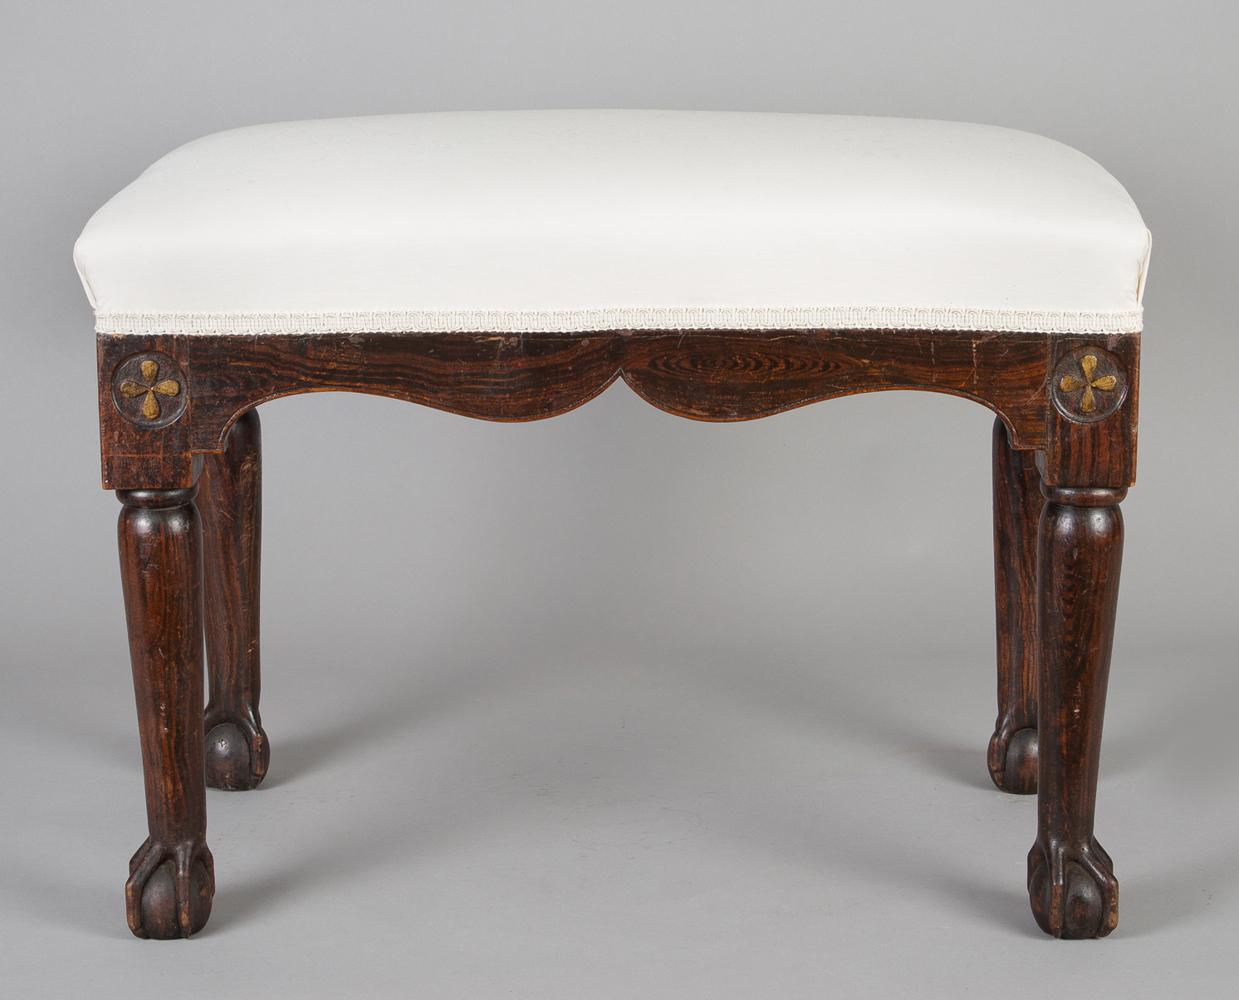 Regency simulated rosewood bench with shaped apron, gilded Gothic quatrefoil carving on the leg block above turned legs ending in ball and claw feet.